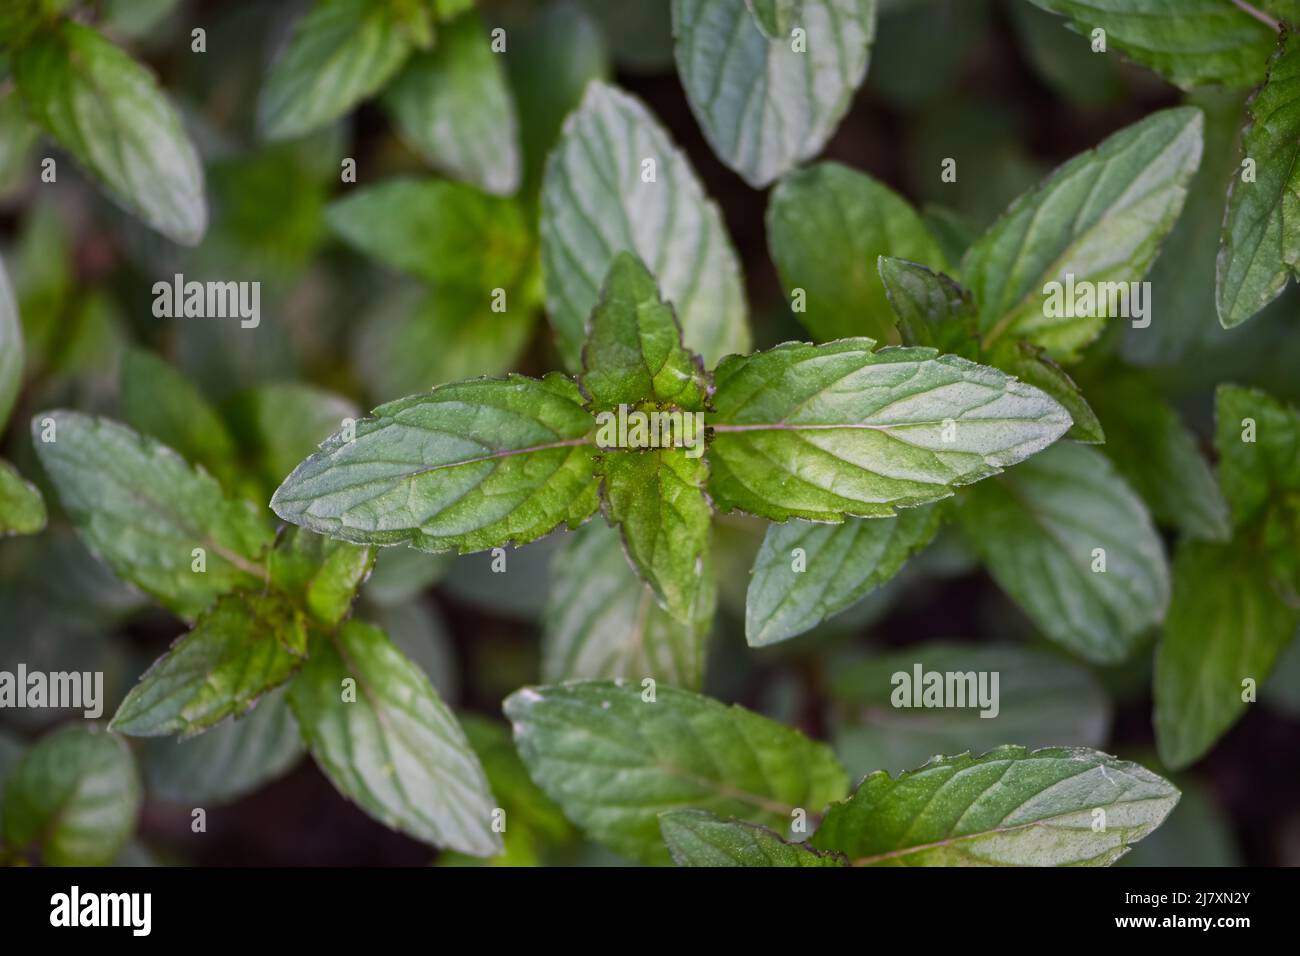 Perennial herbaceous plant in the mint family - Spearmint, Garden mint, Menthol Mint in the garden bed Stock Photo